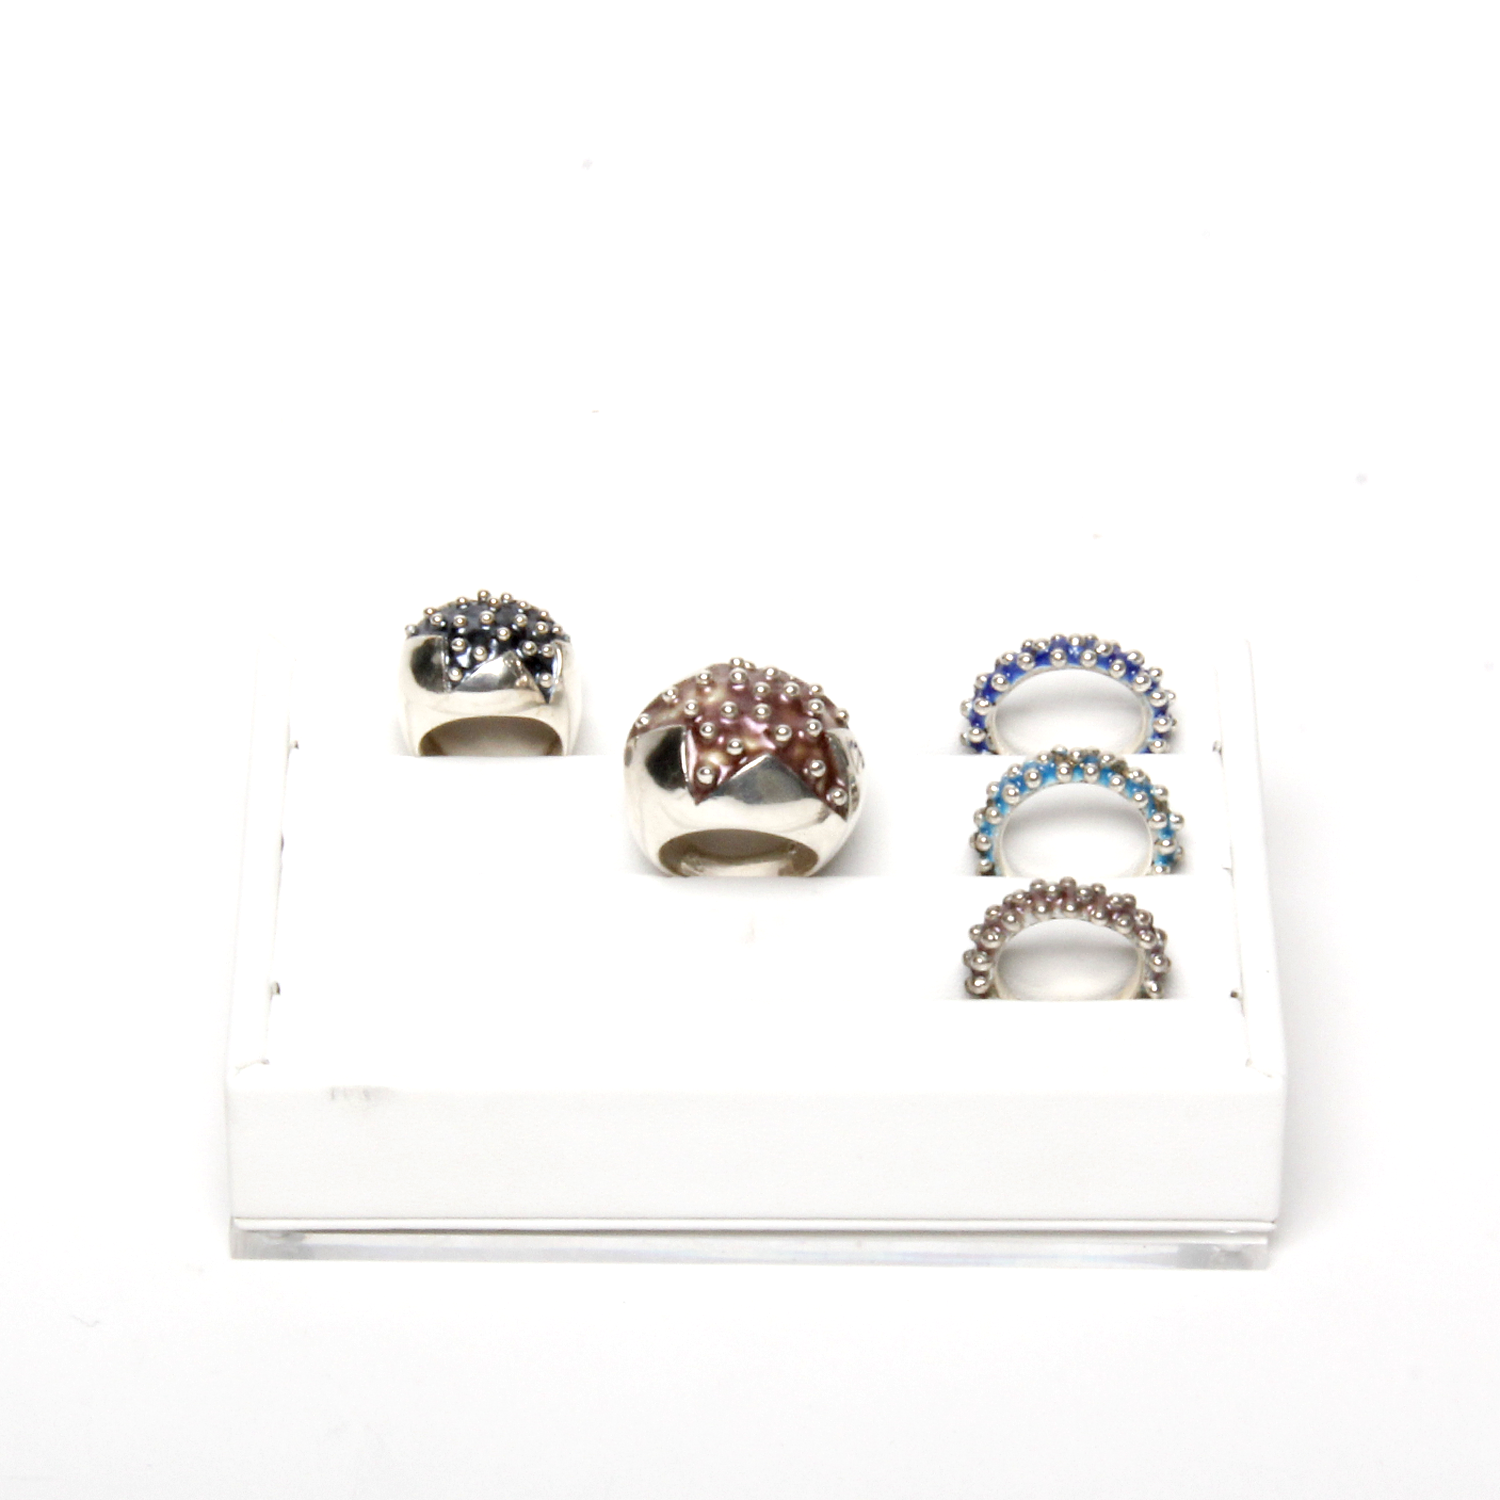 Cinelli Maillet: Blowfish Eternity Ring in Blue Product Image 1 of 3